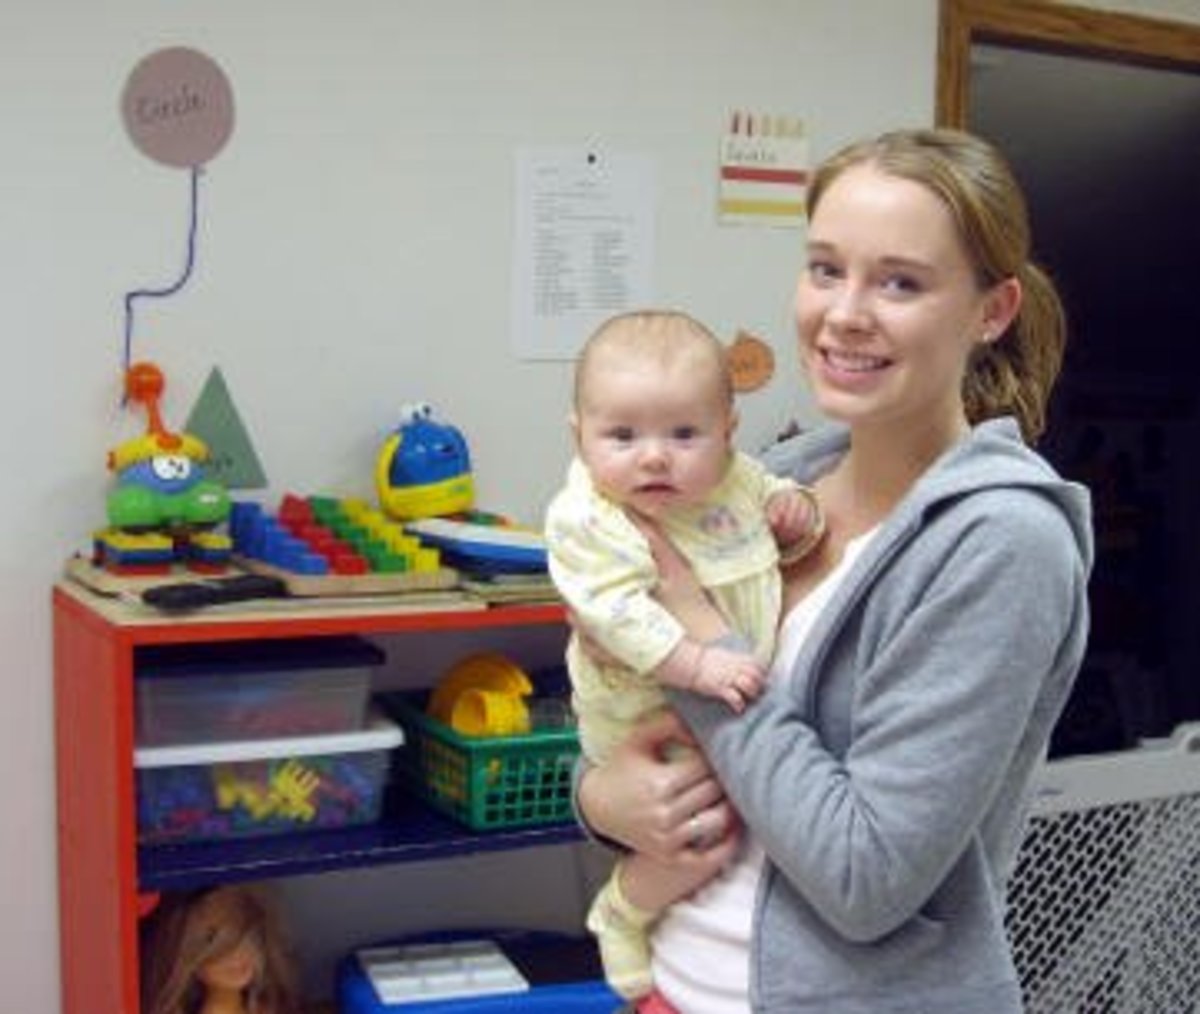 A happy baby at a quality childcare center